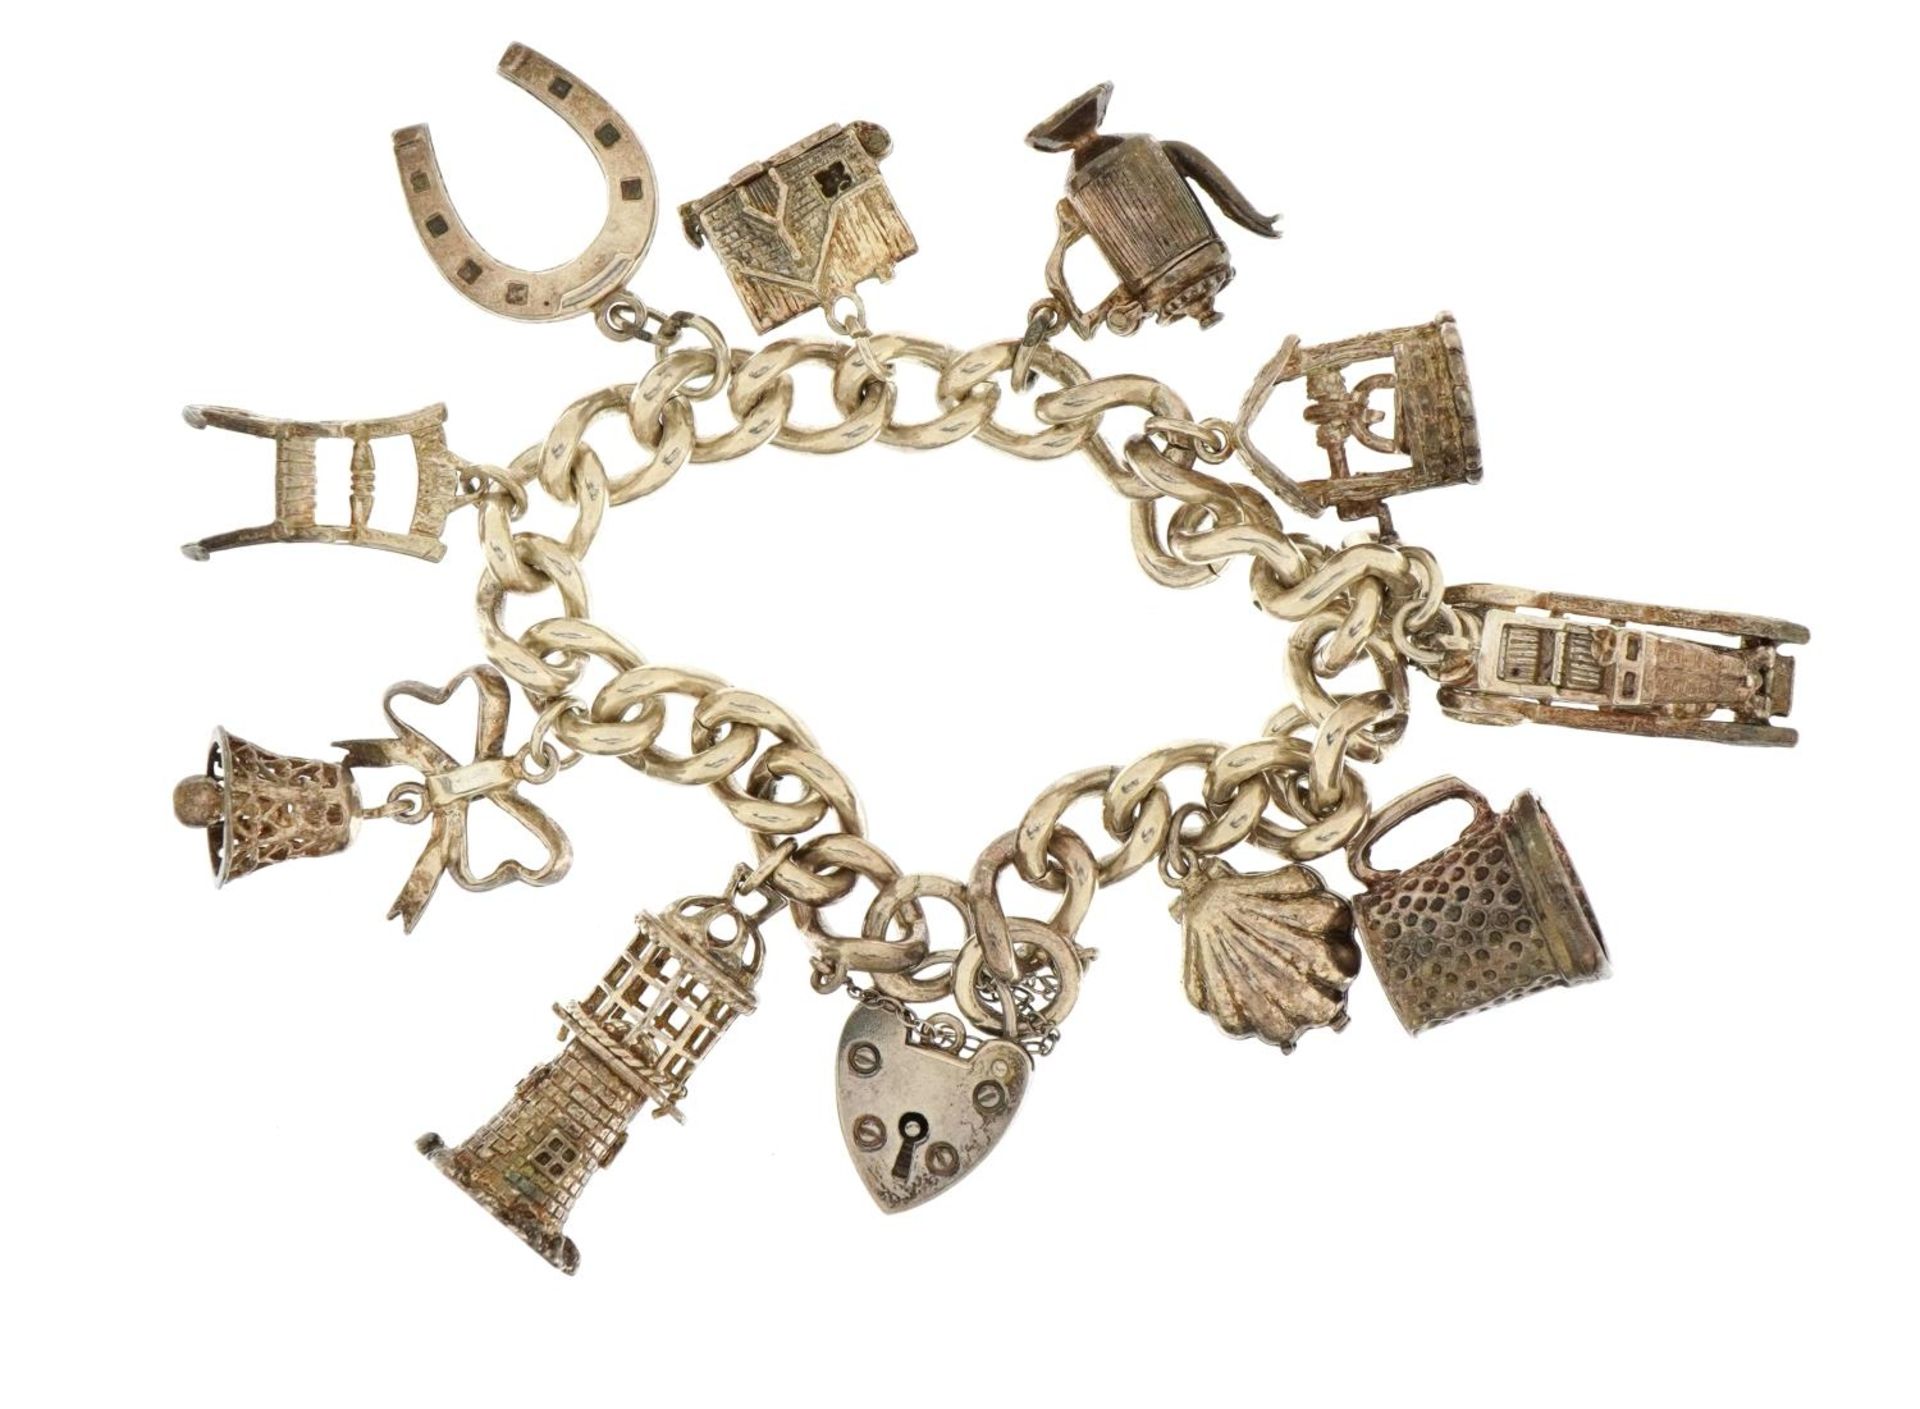 Silver charm bracelet with love heart padlock and a selection of mostly silver charms, including